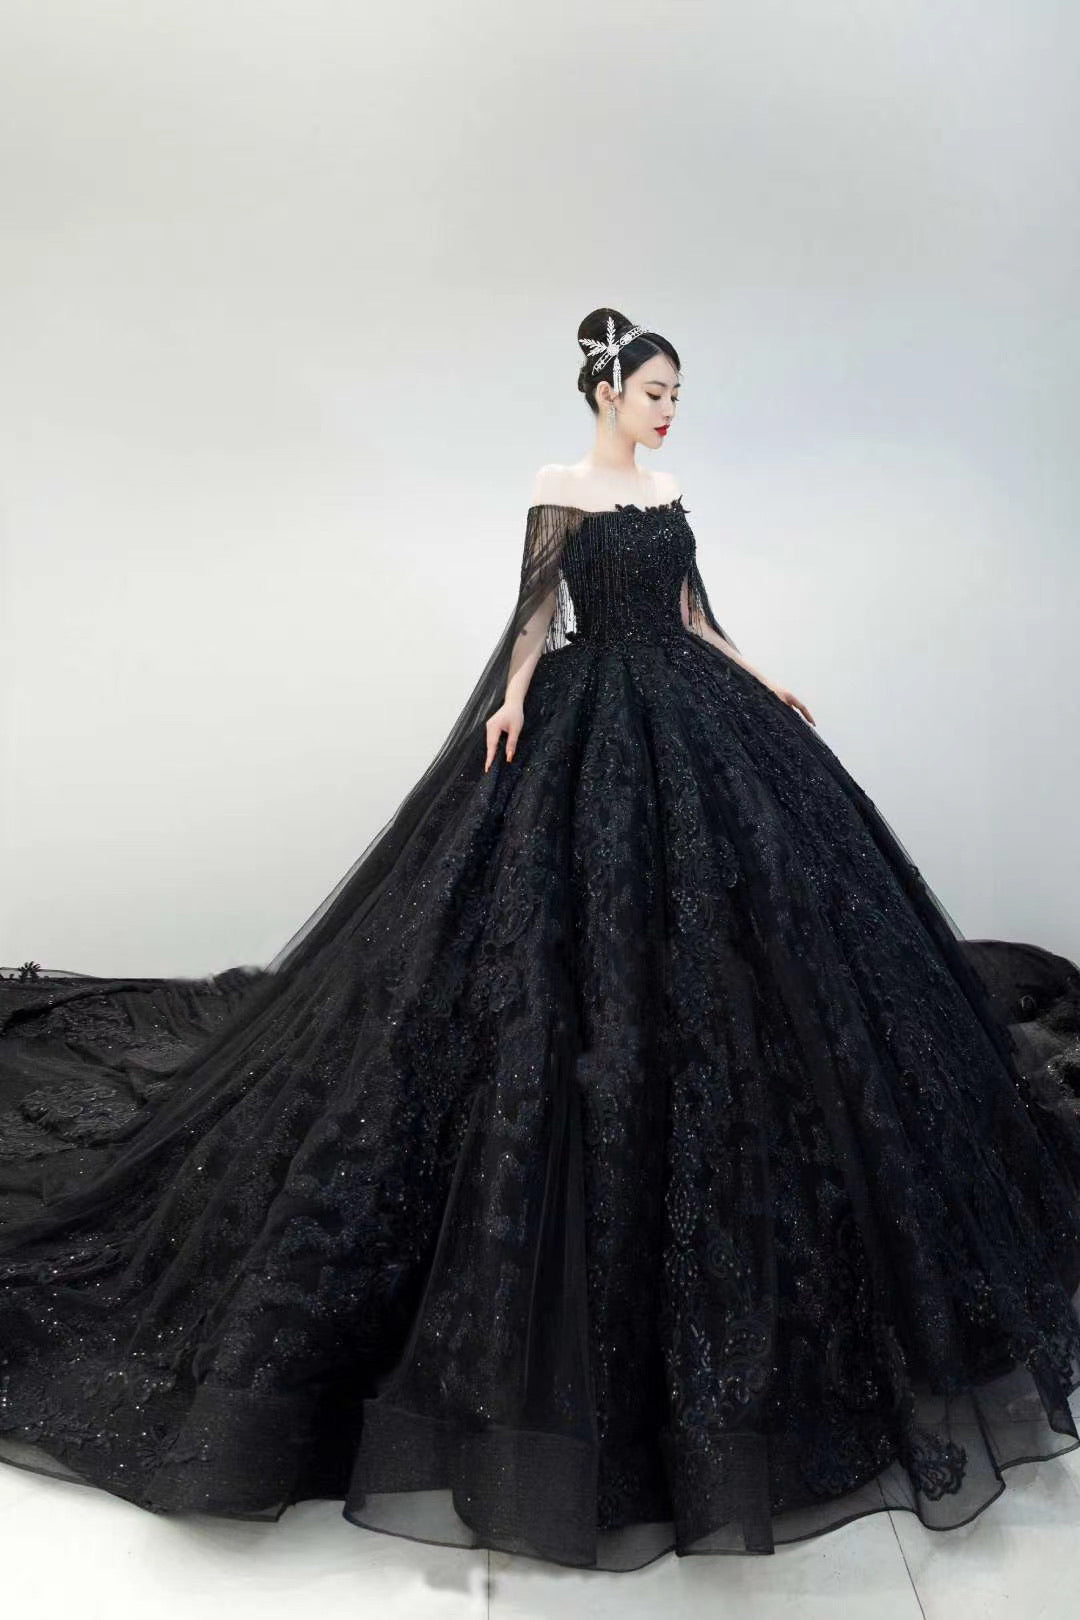 Luxury Jewel Neck Lace Applique Ballgown Lace Wedding Dress With Long  Sleeves, Sweep Train, And Puffy Skirt From Weddingpalacedress, $225.46 |  DHgate.Com